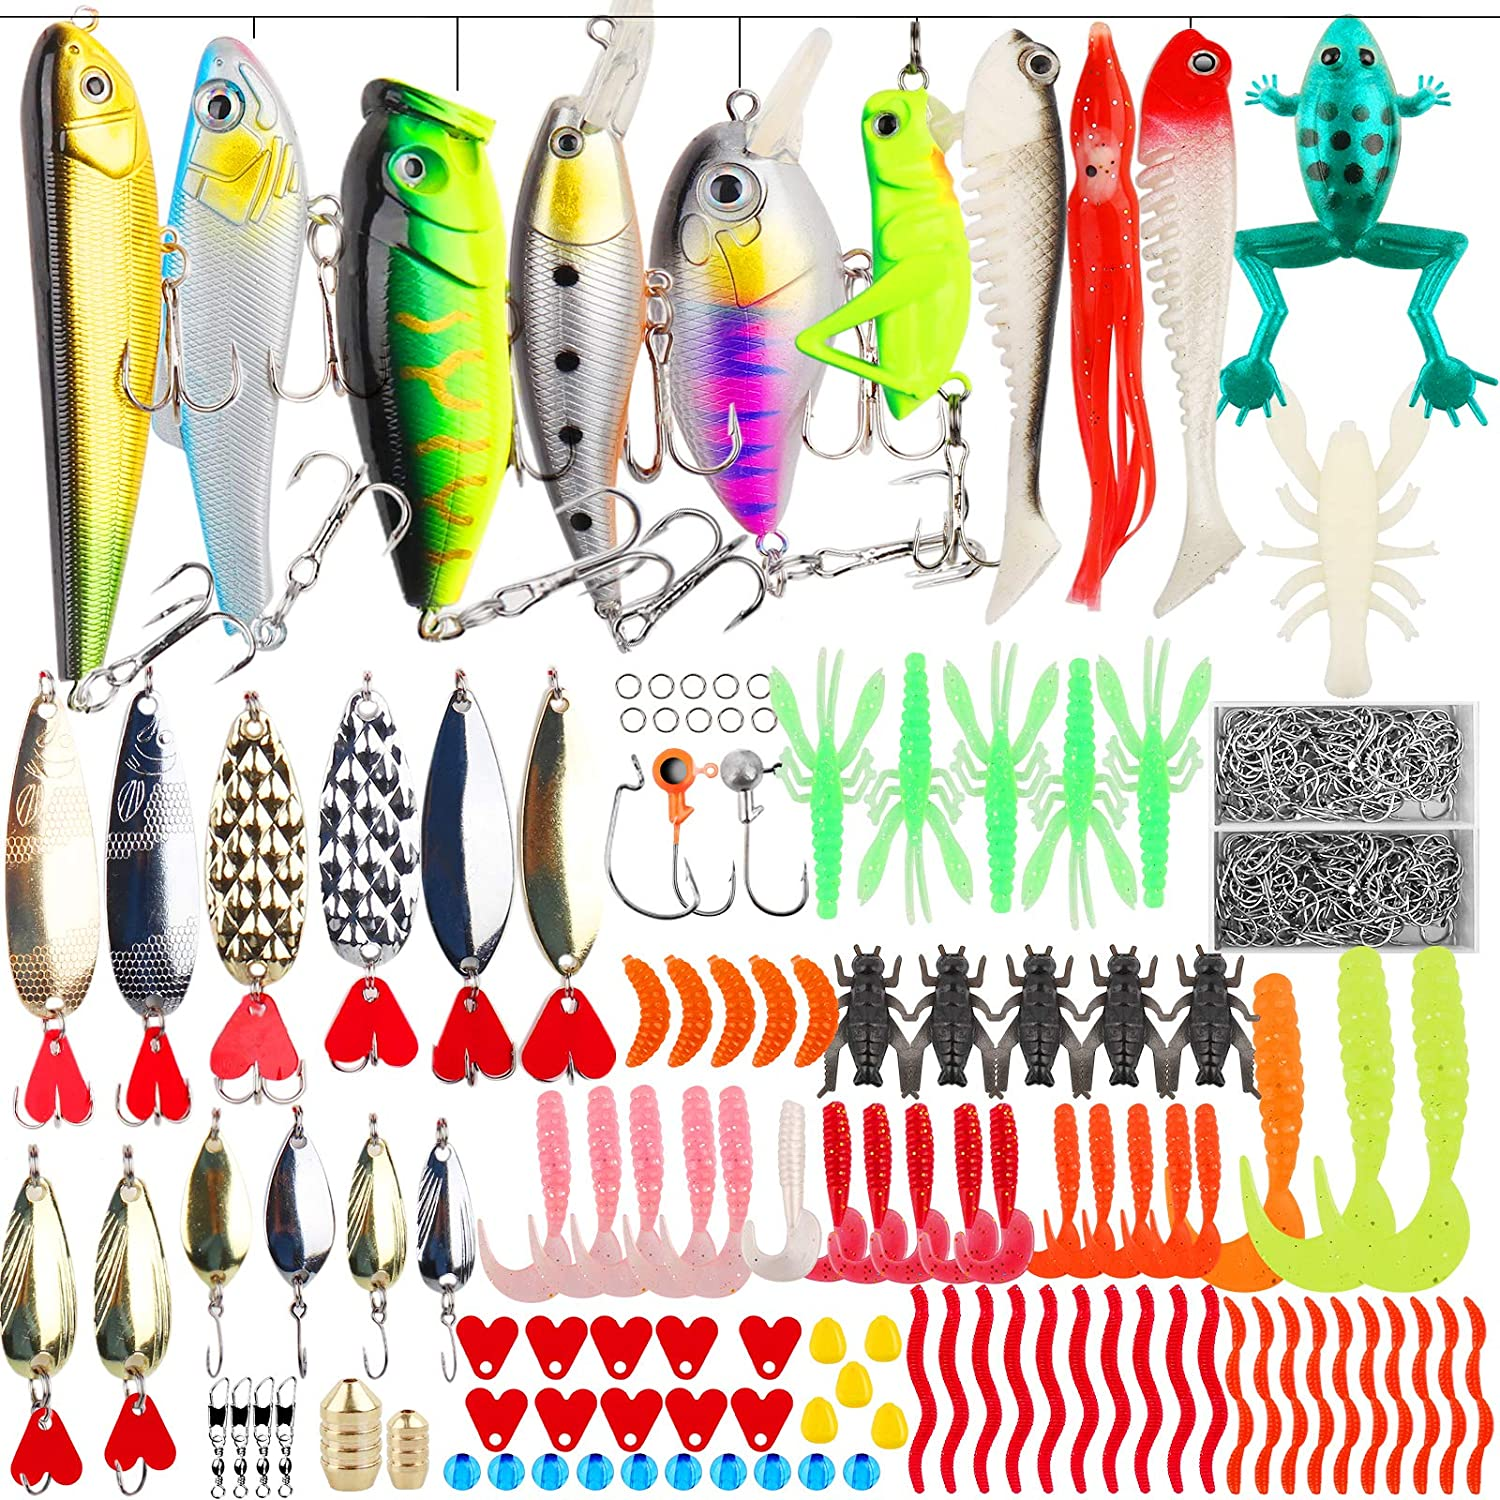 Various Lifelike Fishing Artificial Baits for Topwater,Fishing Tackle Box Fishing Gear for Hooking Bass Trout Salmon,Portable Fishing Tackle Kit Outdoor